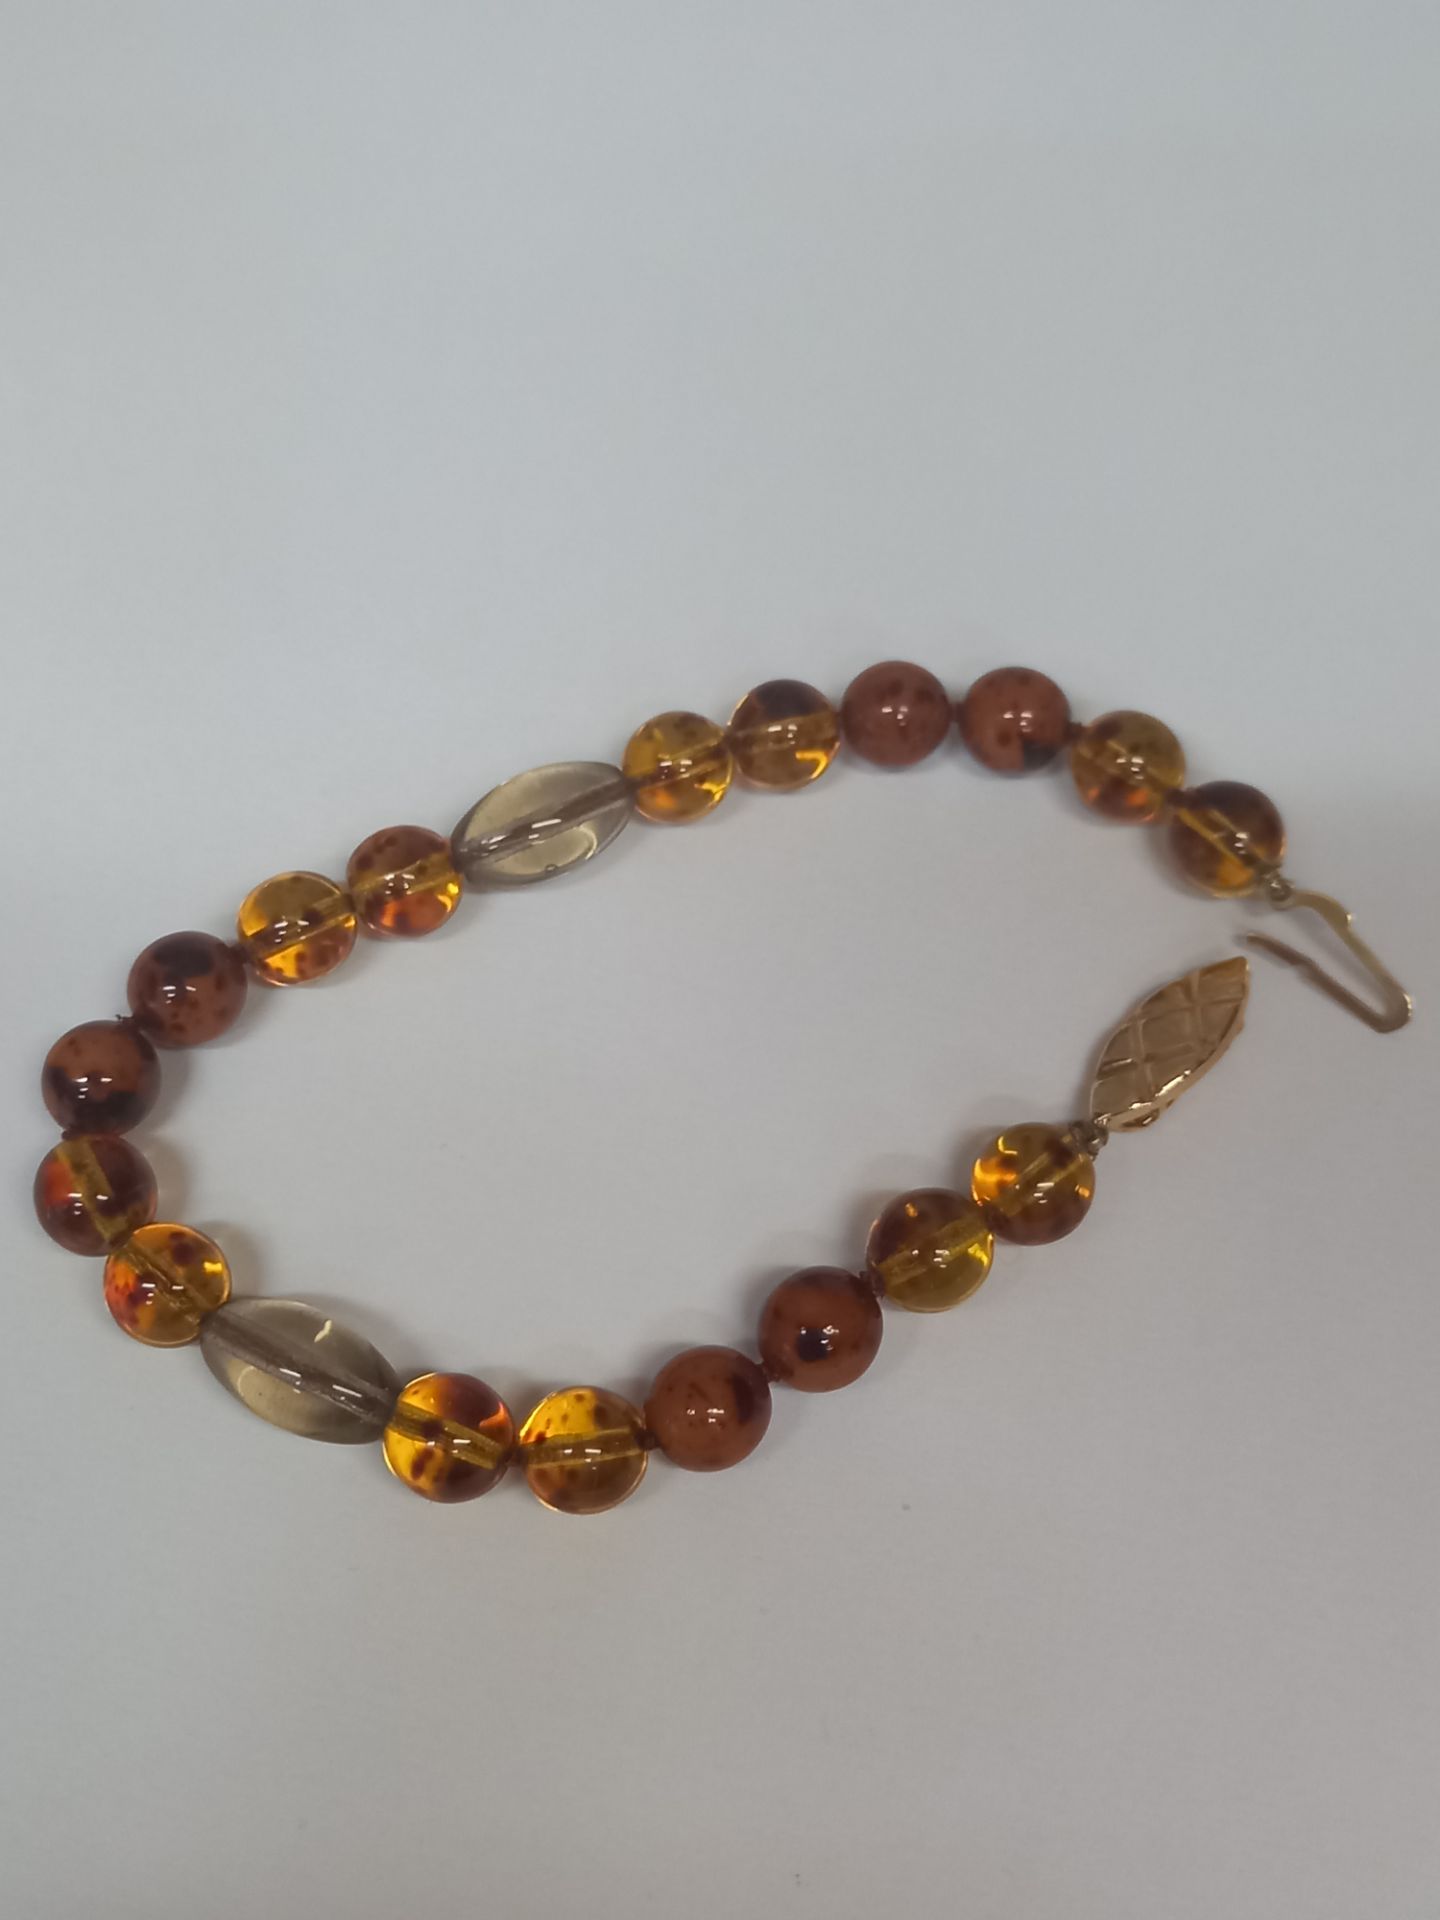 KNOTTED BALTIC AMBER BRACELET - Image 3 of 4